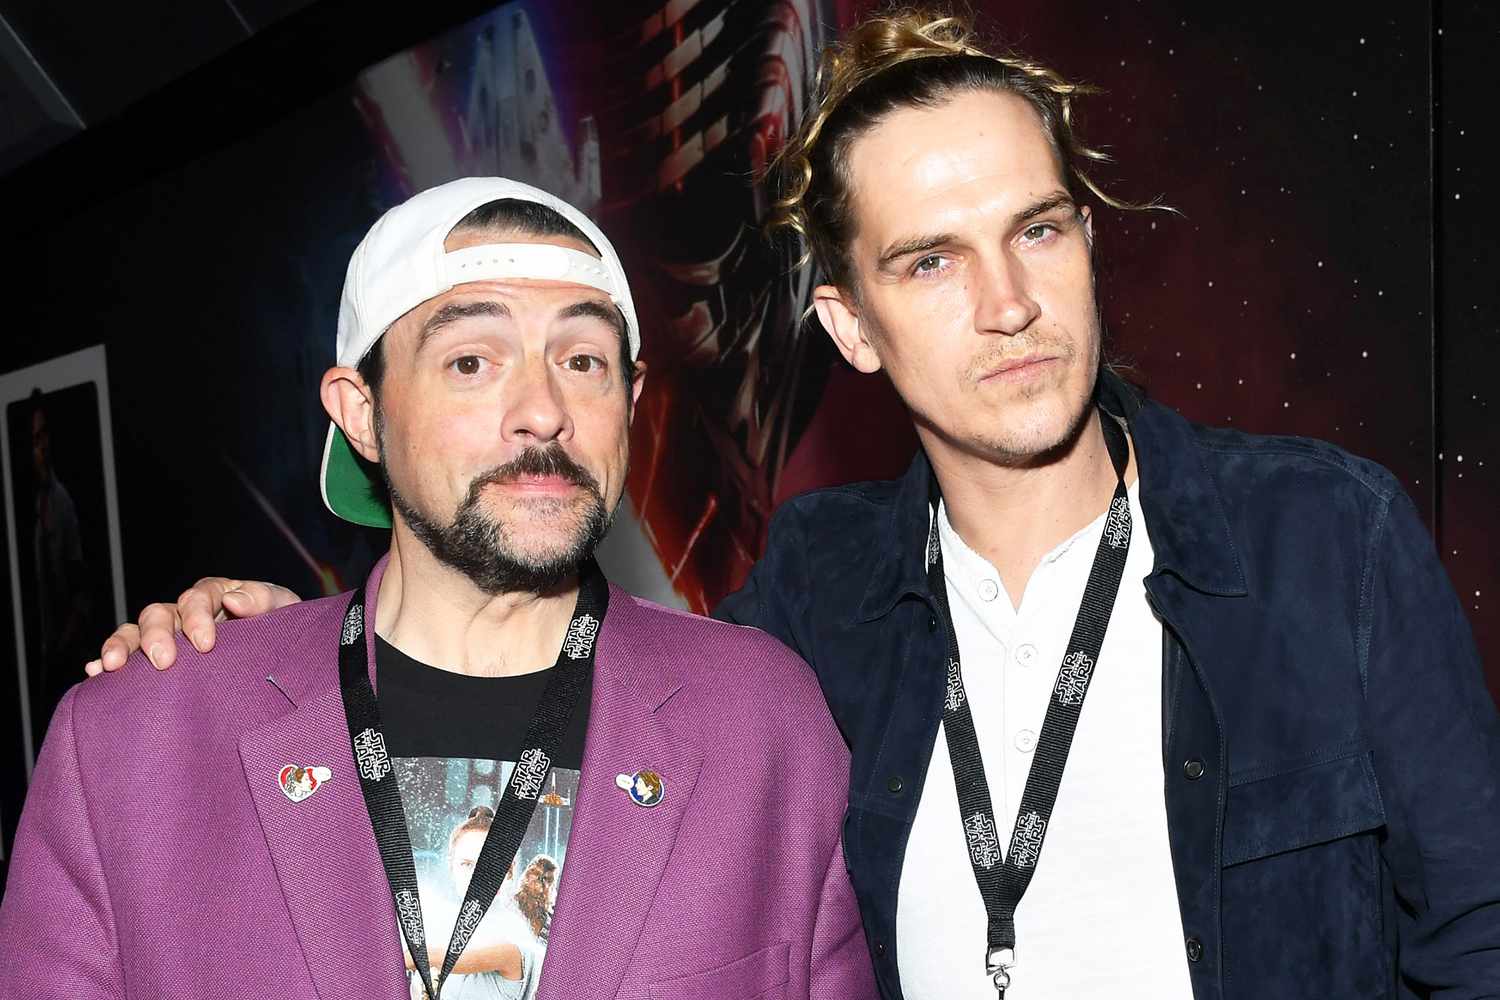 Kevin Smith and Jason Mewes arrive for the World Premiere of "Star Wars: The Rise of Skywalker", the highly anticipated conclusion of the Skywalker saga on December 16, 2019 in Hollywood, California.